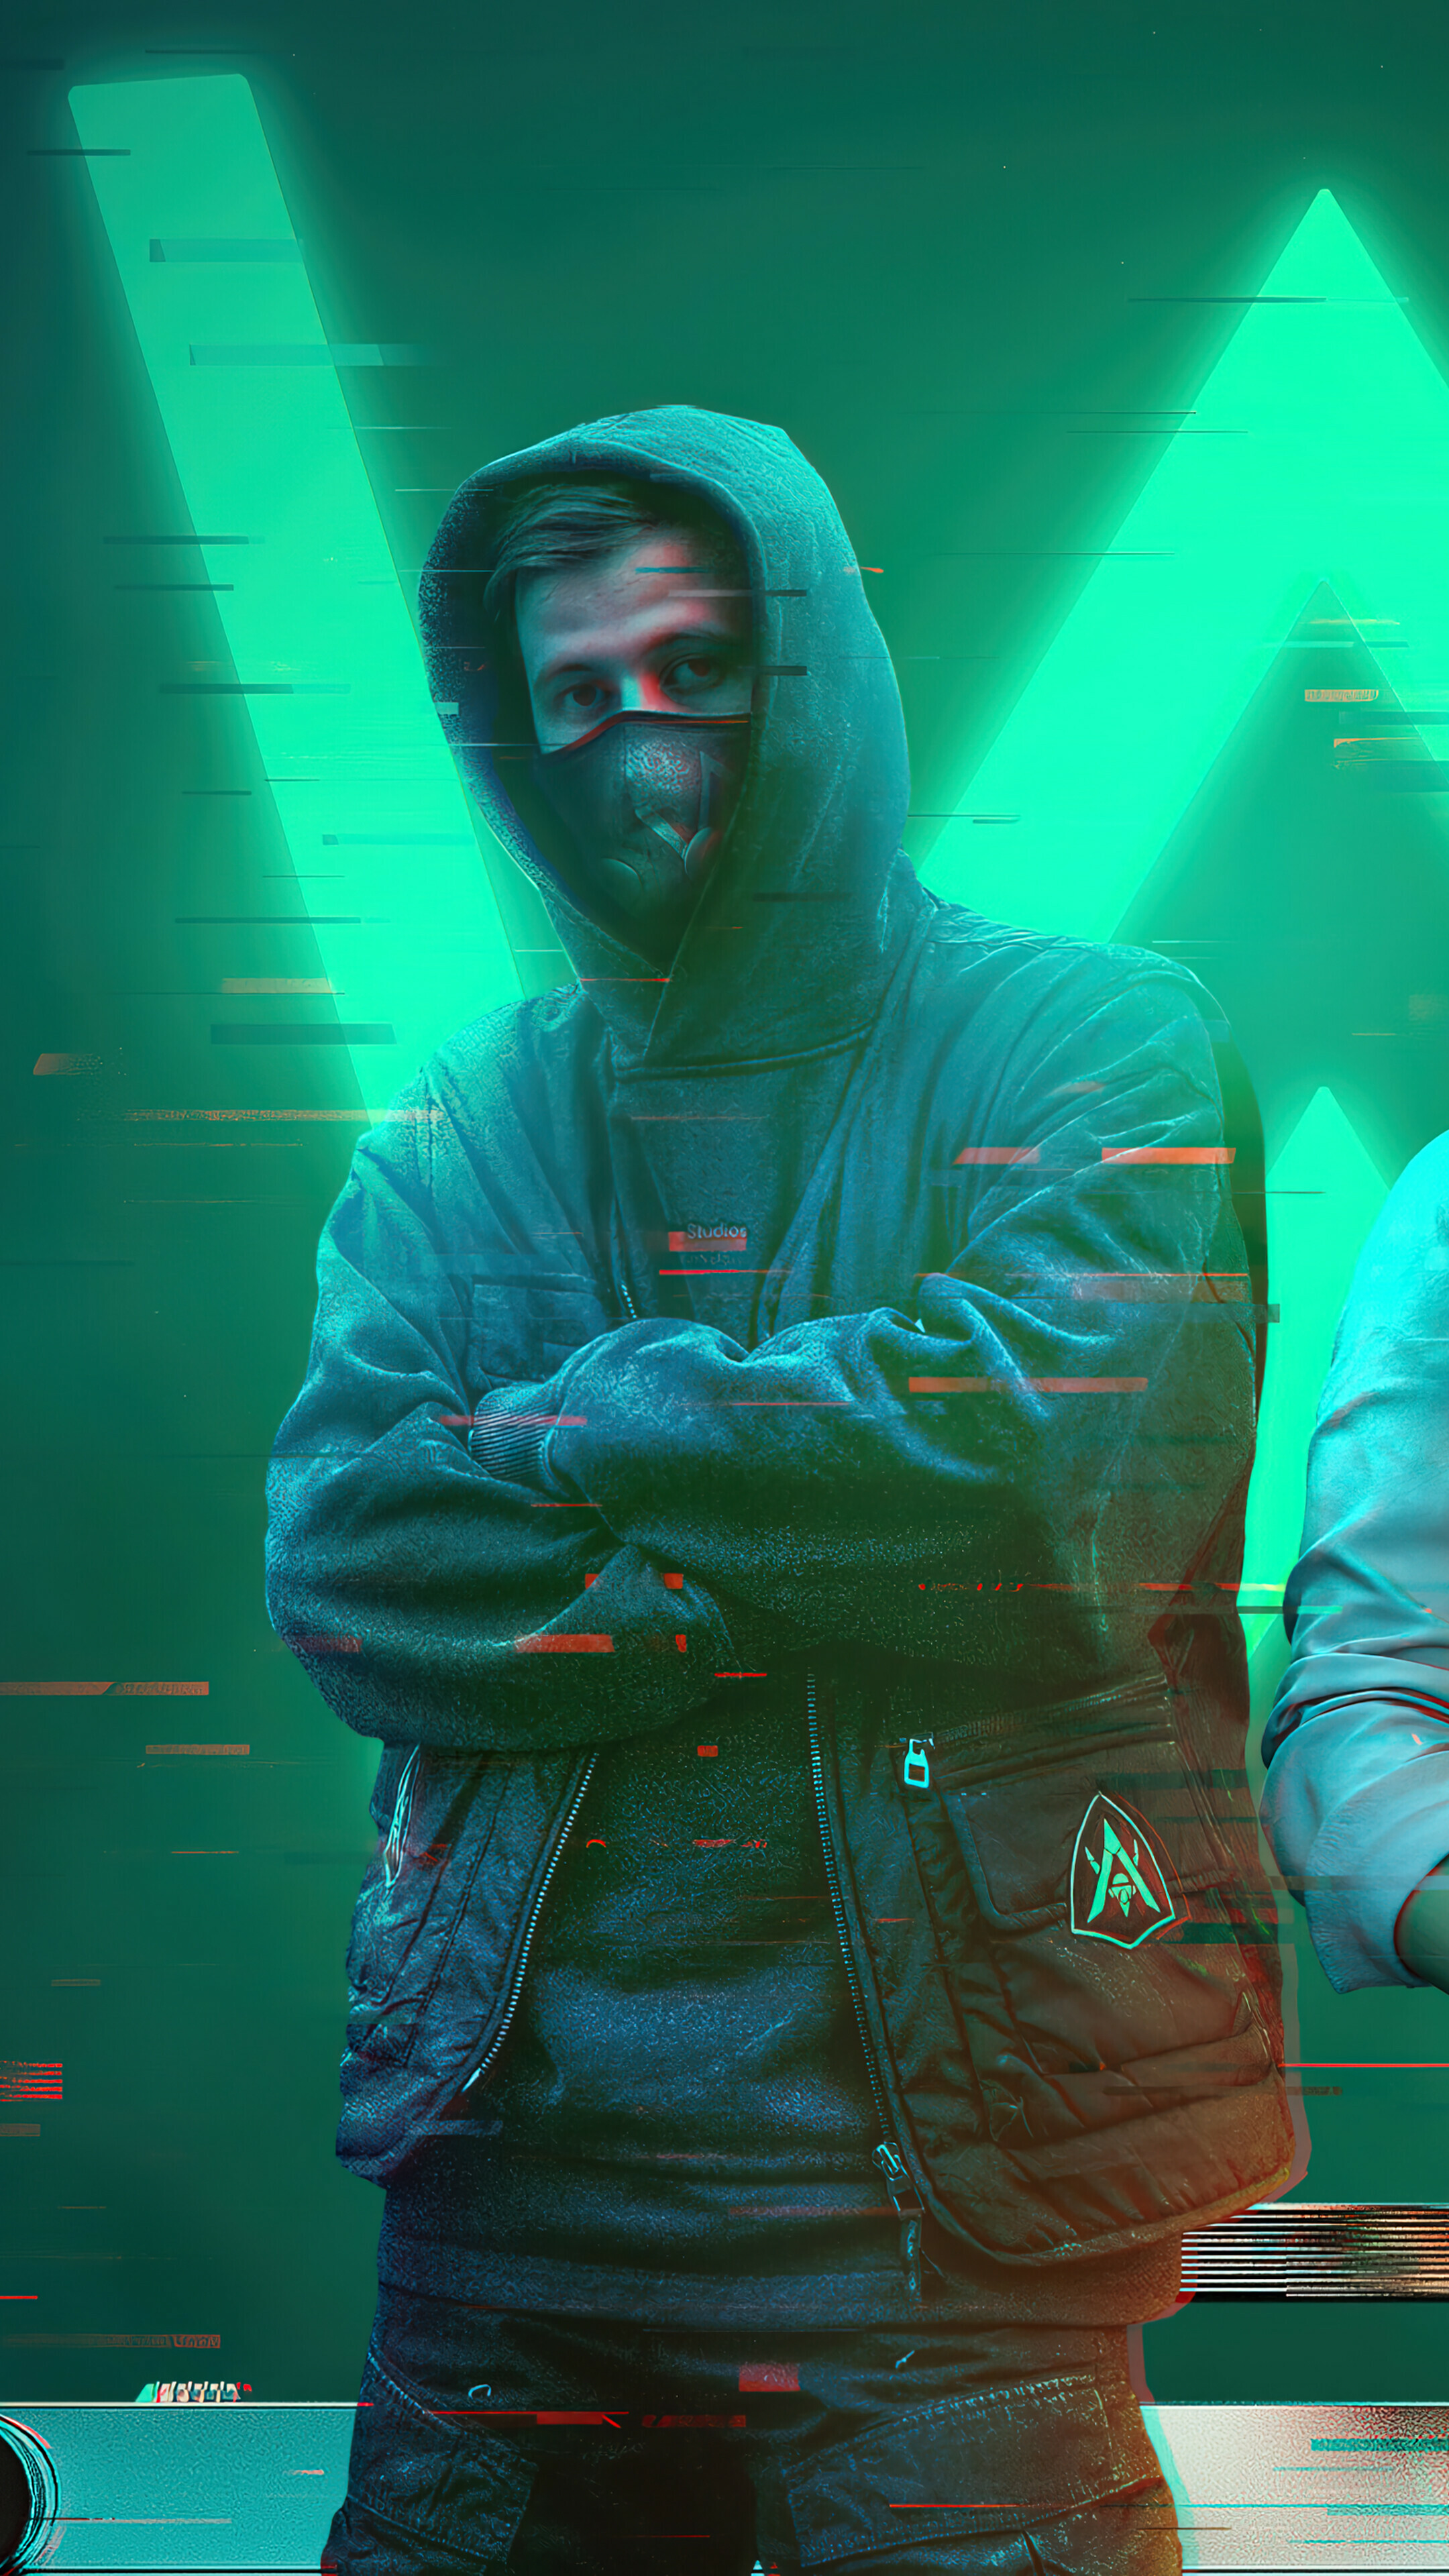 Alan Walker: "Sing Me to Sleep", "Alone", Attracted millions of views on YouTube. 2160x3840 4K Background.